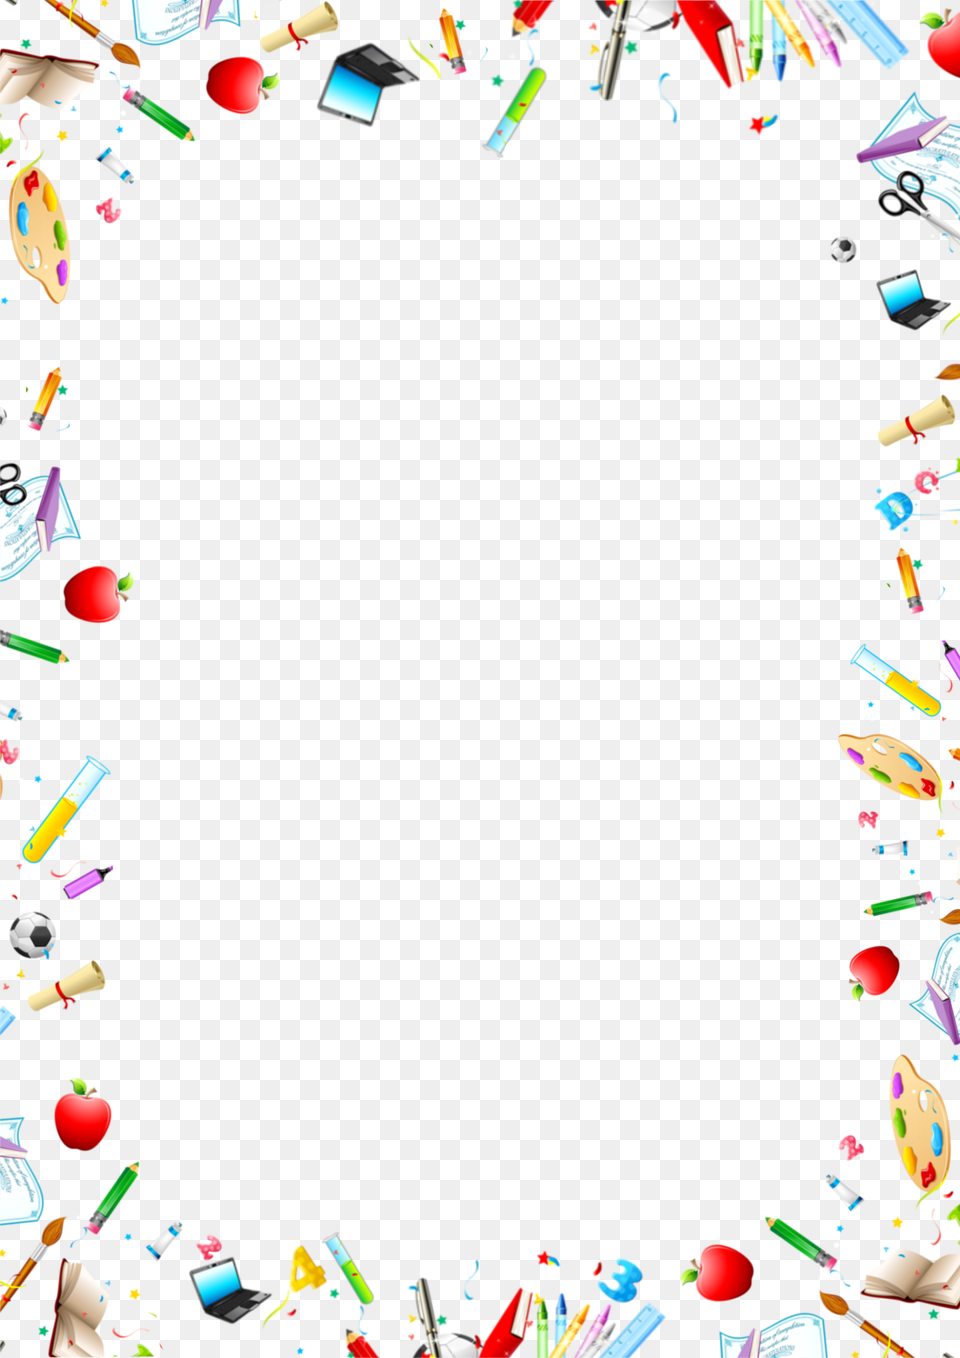 Stationery Vector Art Supplies Border, Paper, Confetti Png